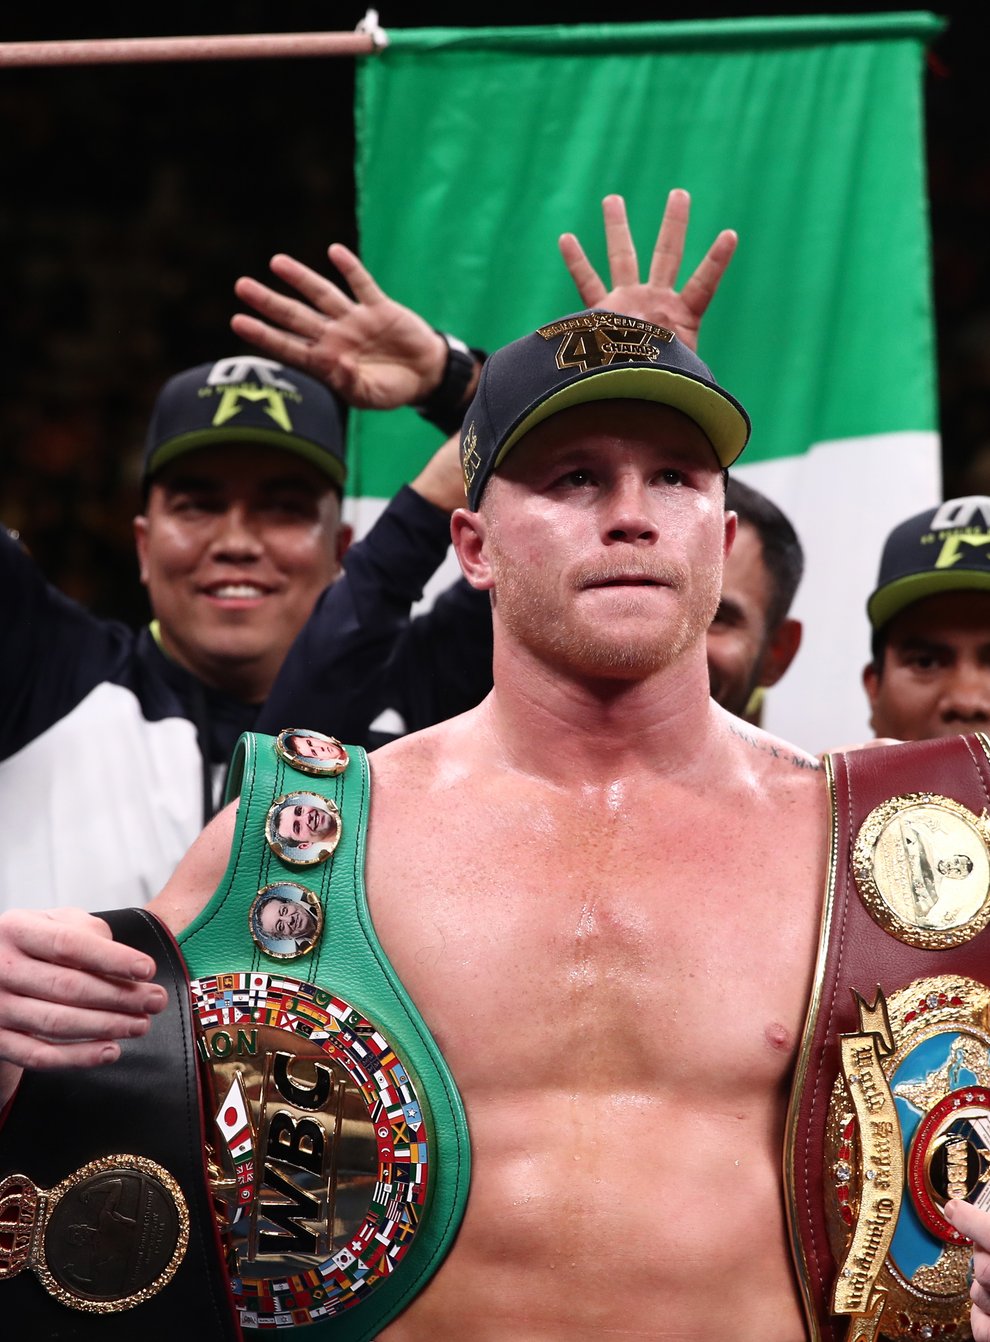 It is unclear whether Canelo's legal dispute will disrupt his plans to fight this year